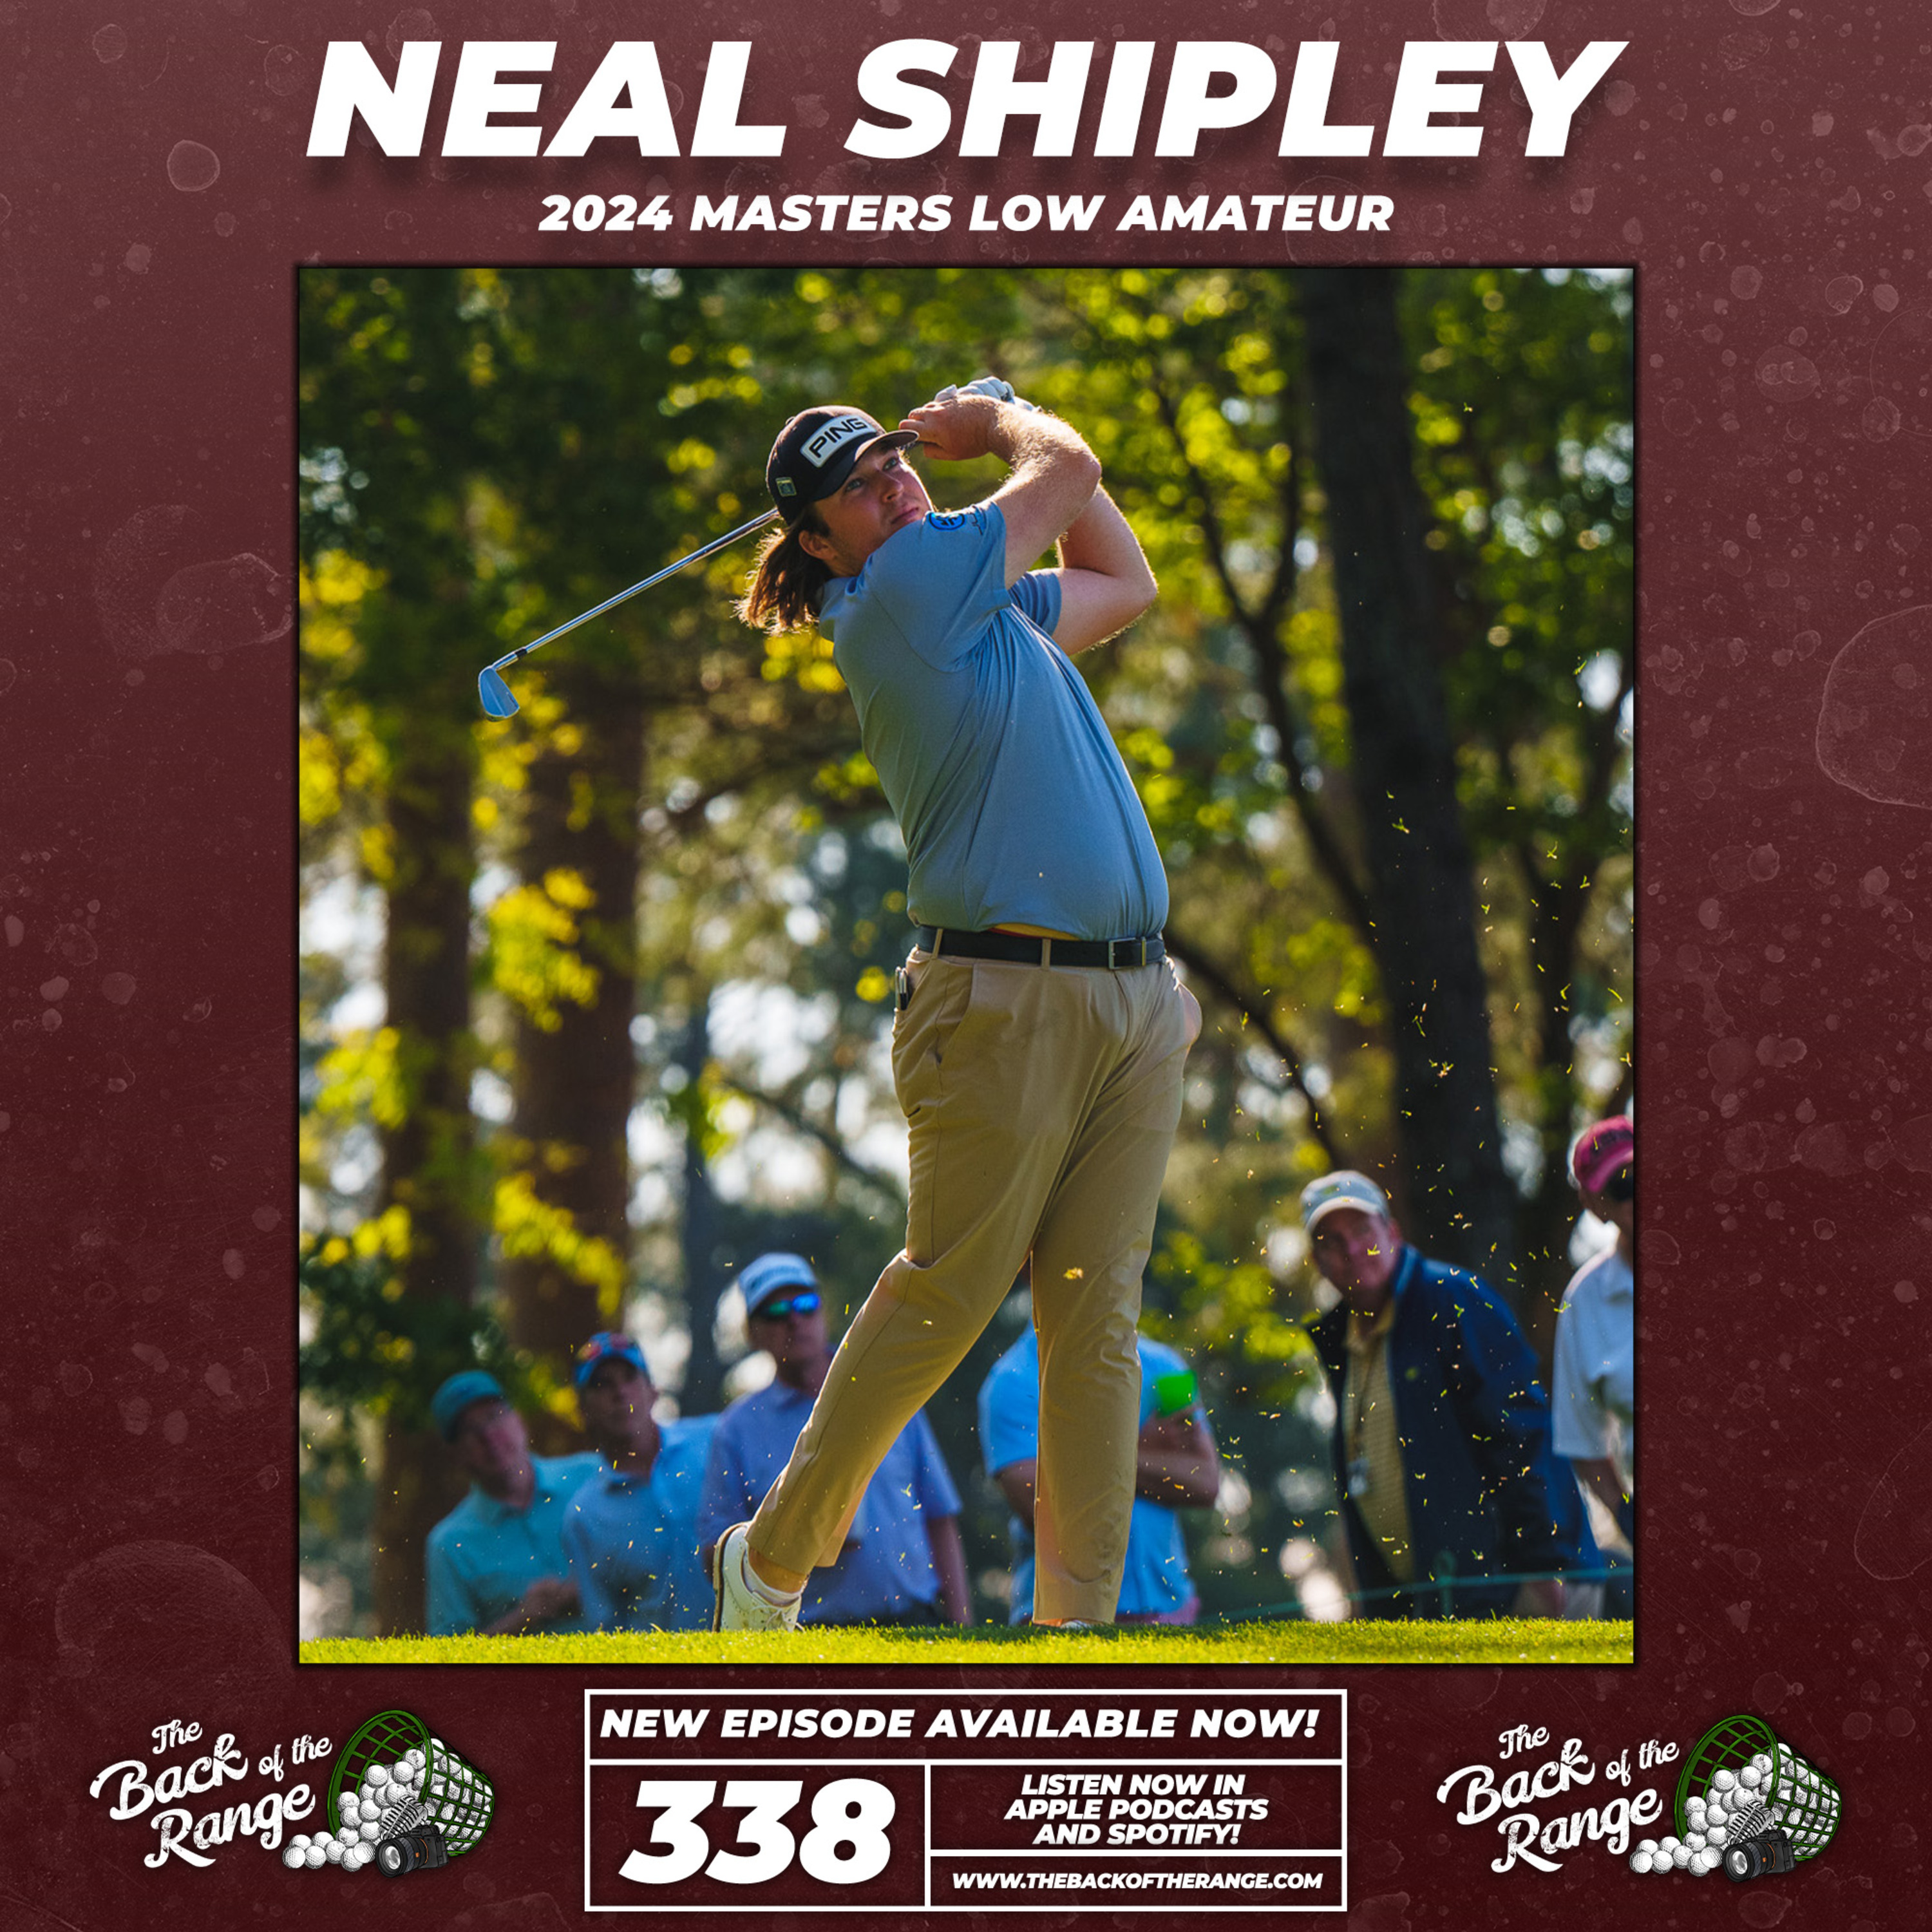 Neal Shipley - Low Amateur of the 2024 Masters